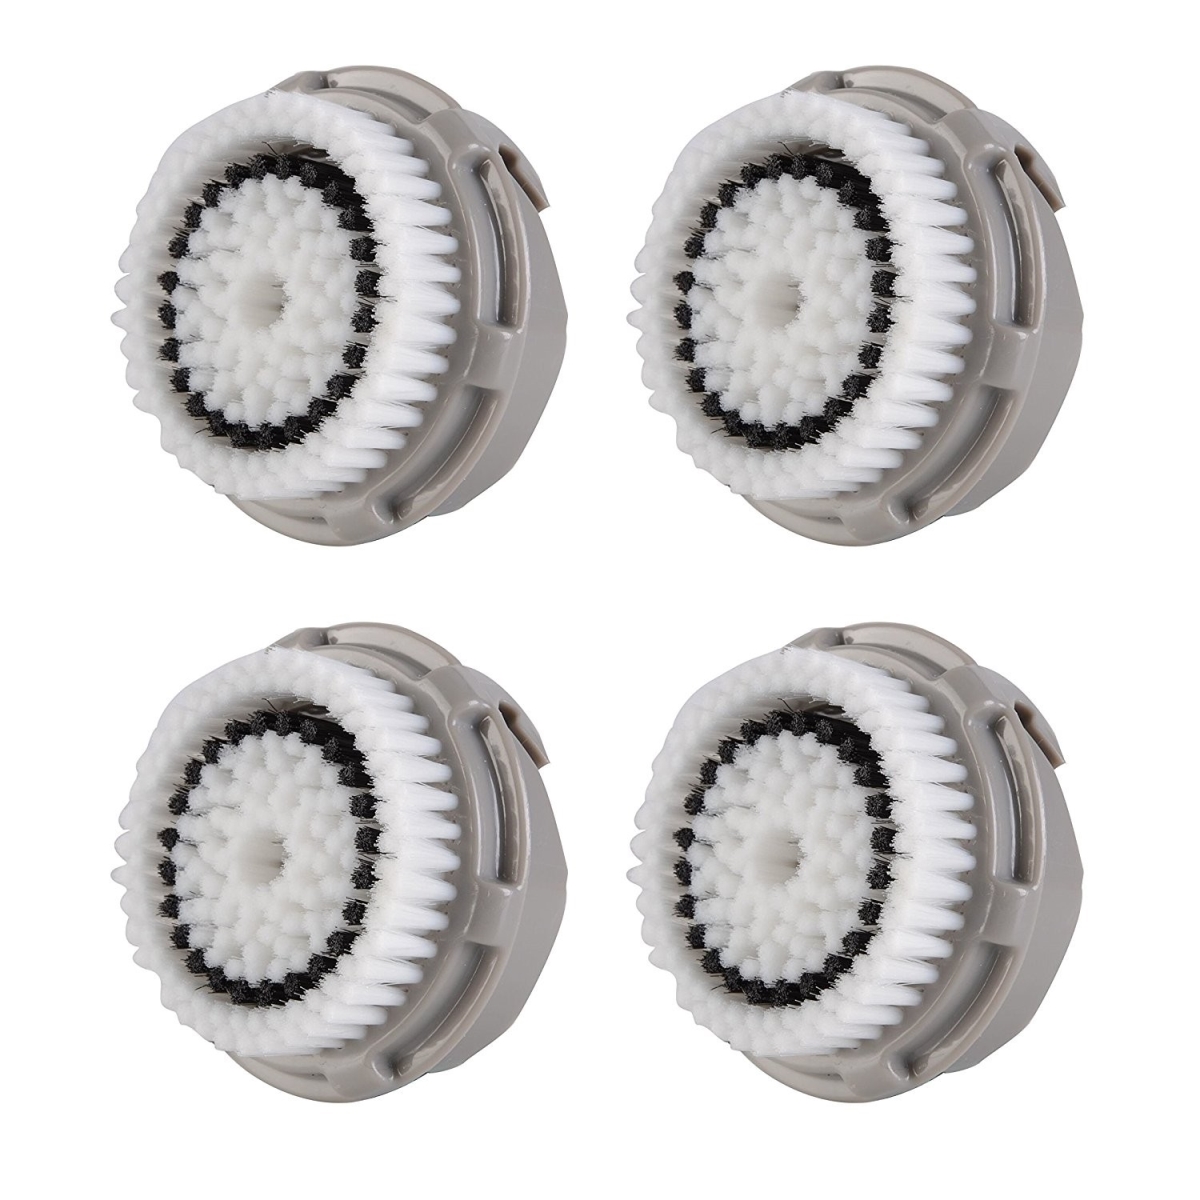 Fbhn4 Compatible Replacement Facial Cleansing Brush Heads - Pack Of 4